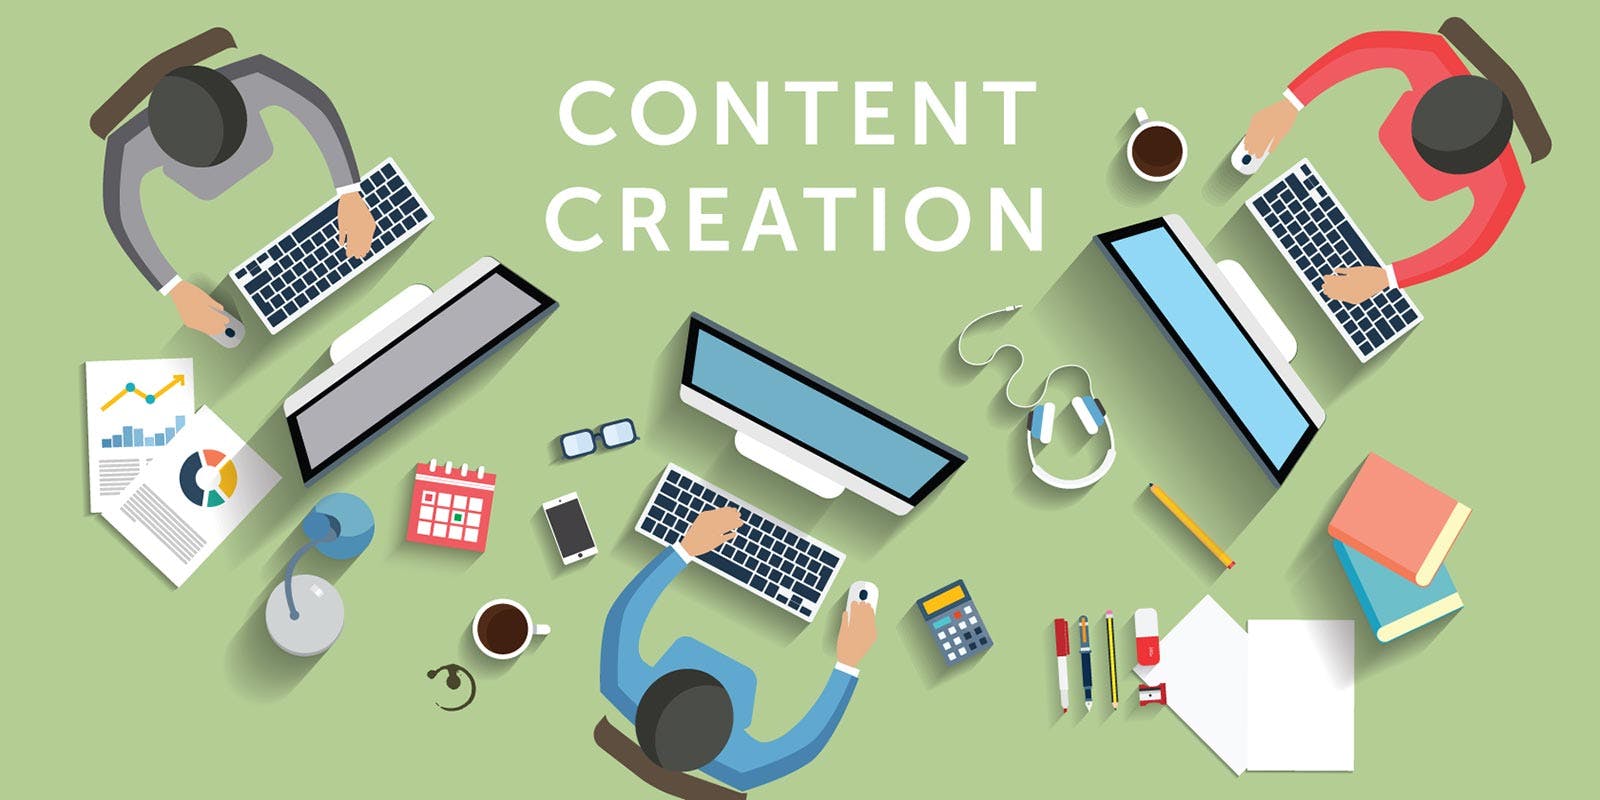 Coordinating and Enhancing Content Creation in Areas of Interest